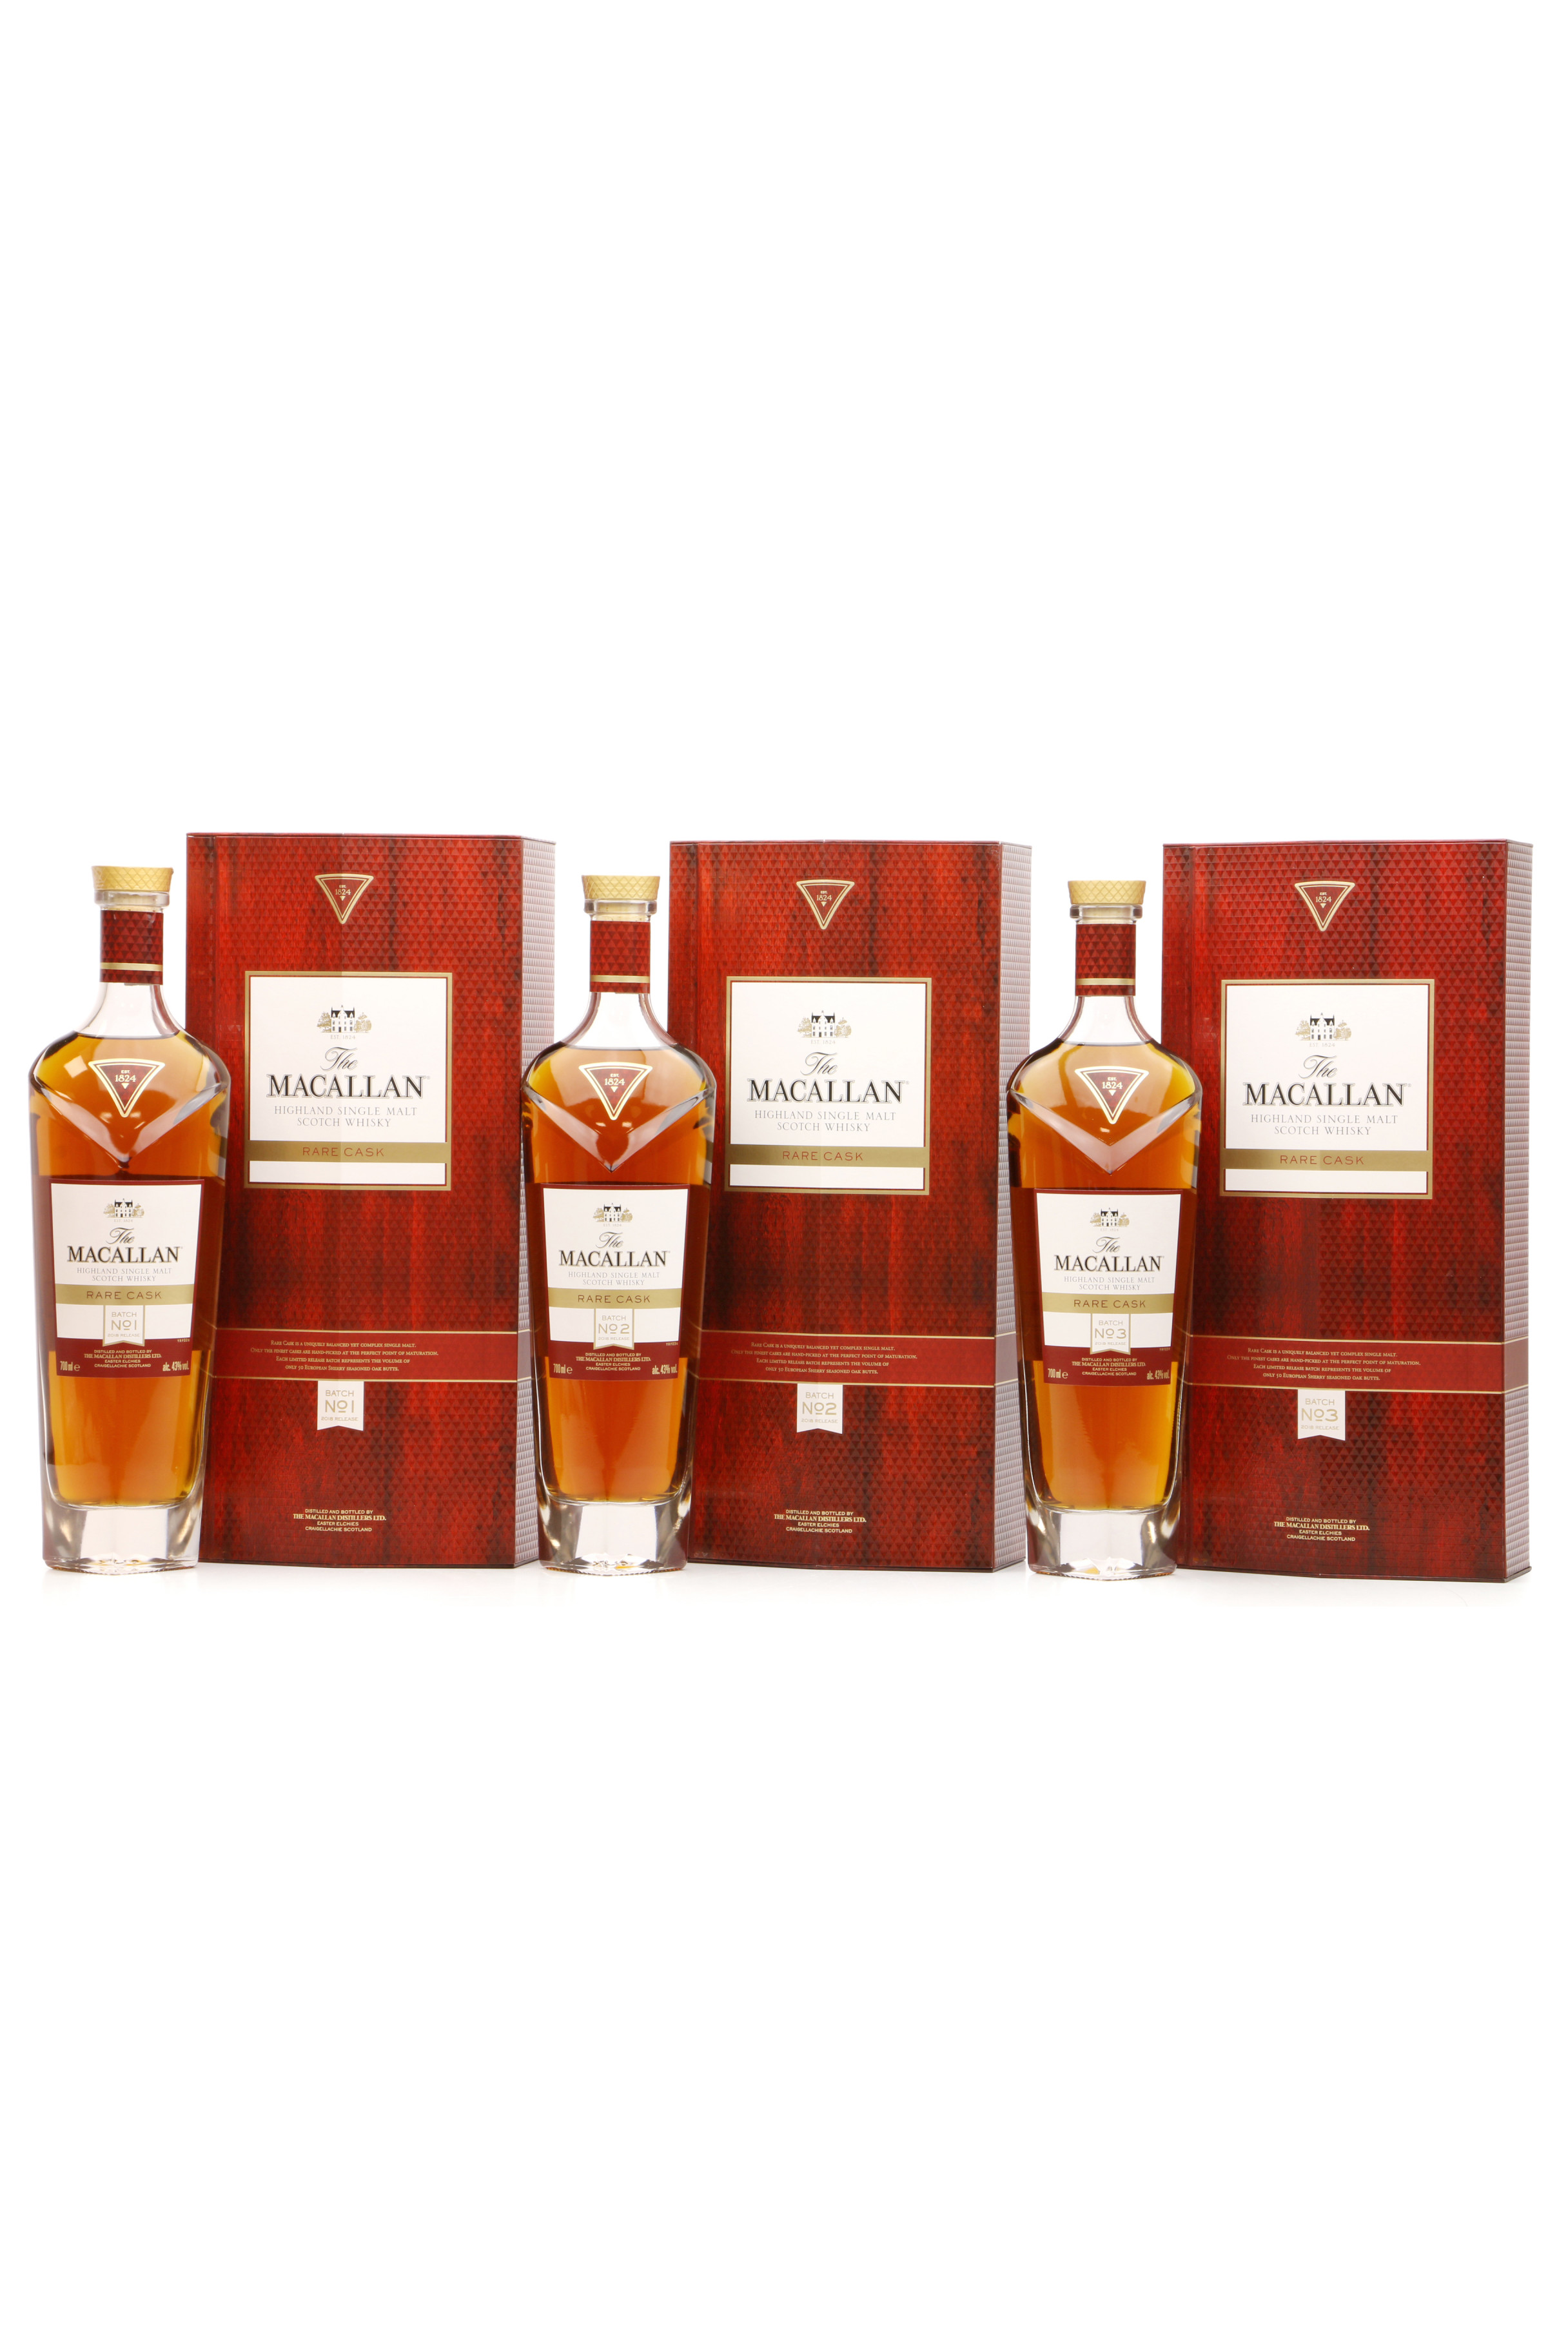 Macallan Rare Cask Batch No 1 2 3 2018 Release 3x70cl Just Whisky Auctions